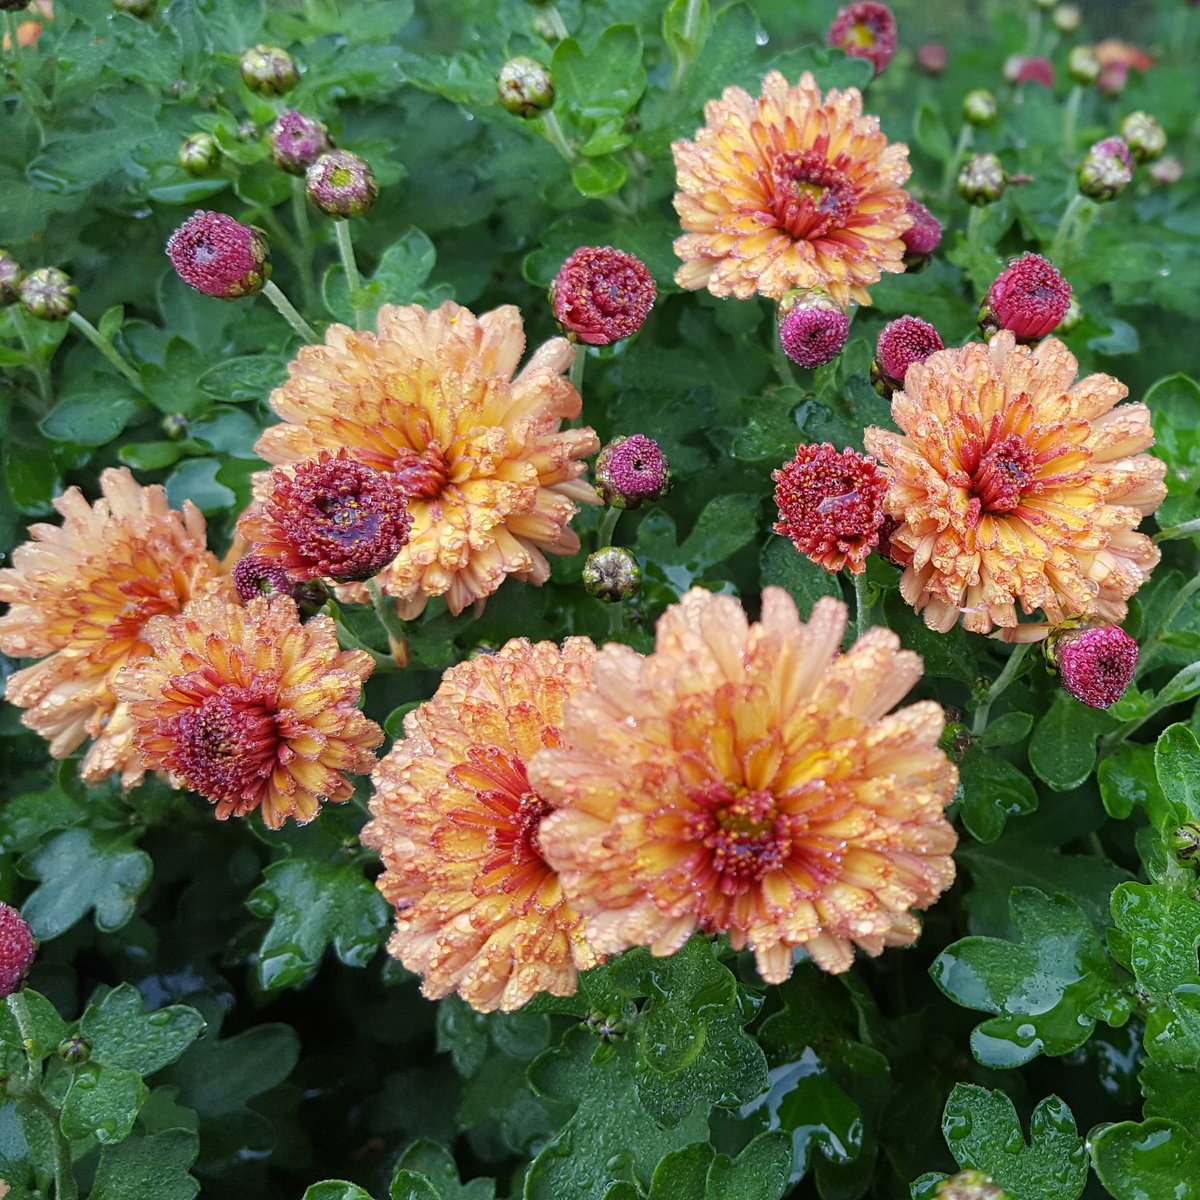 The hardy Chrysanthemums are here!  We have quite a few different ones this year so I may bore you with them over the next week... this is 'Peterkin'.

#chrysanthemum #chrysanthemumpeterkin #hardychrysanthemums #gardenchrysanthemums #autumnflowers #octoberflowers #brownflowers